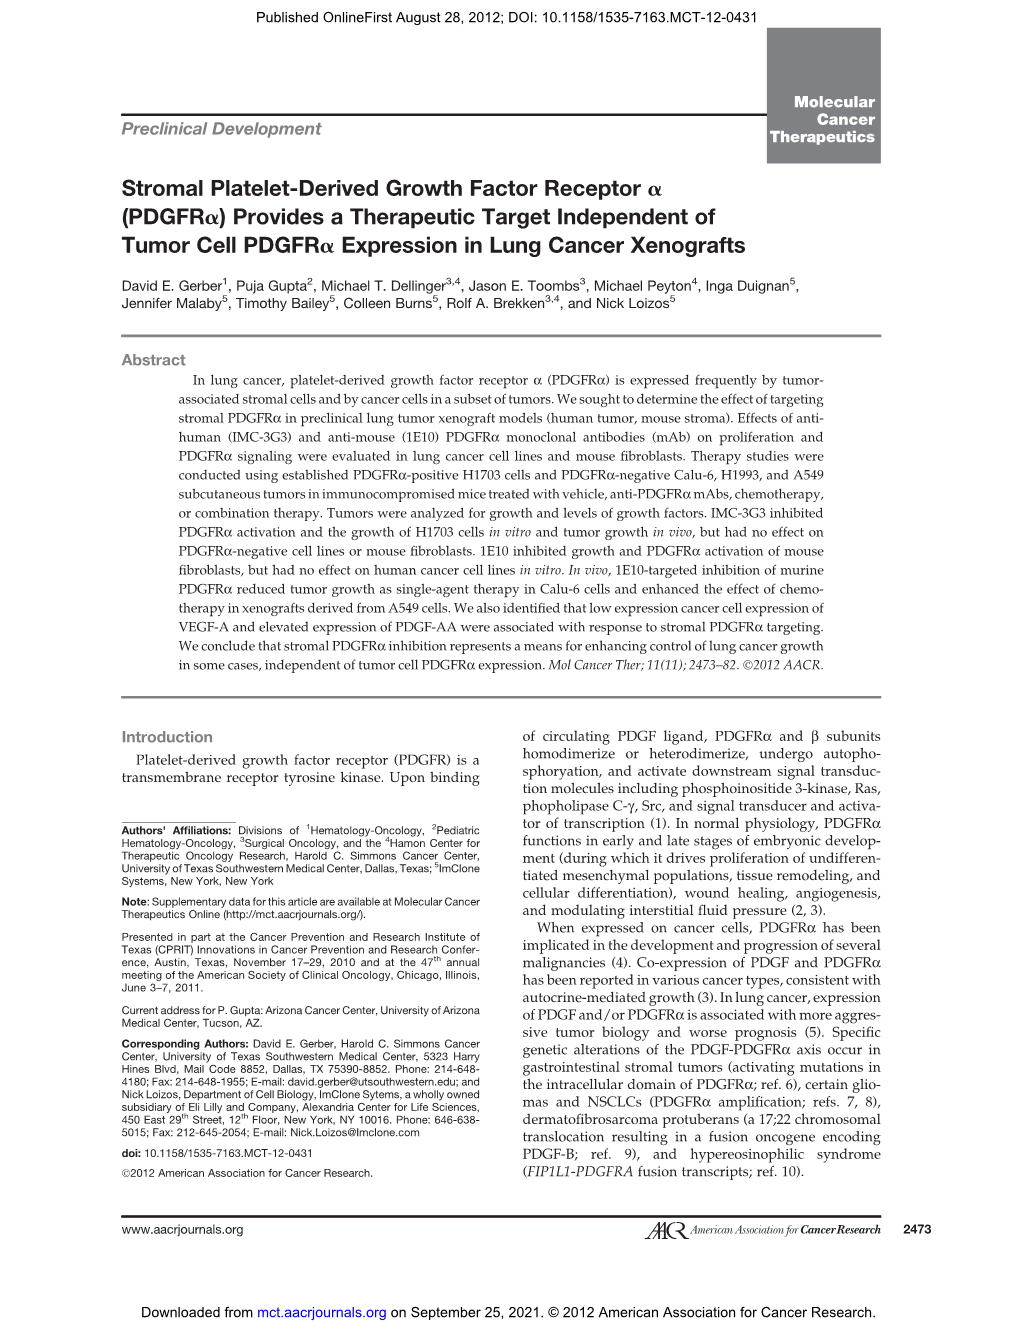 Stromal Platelet-Derived Growth Factor Receptor a (Pdgfra) Provides a Therapeutic Target Independent of Tumor Cell Pdgfra Expression in Lung Cancer Xenografts